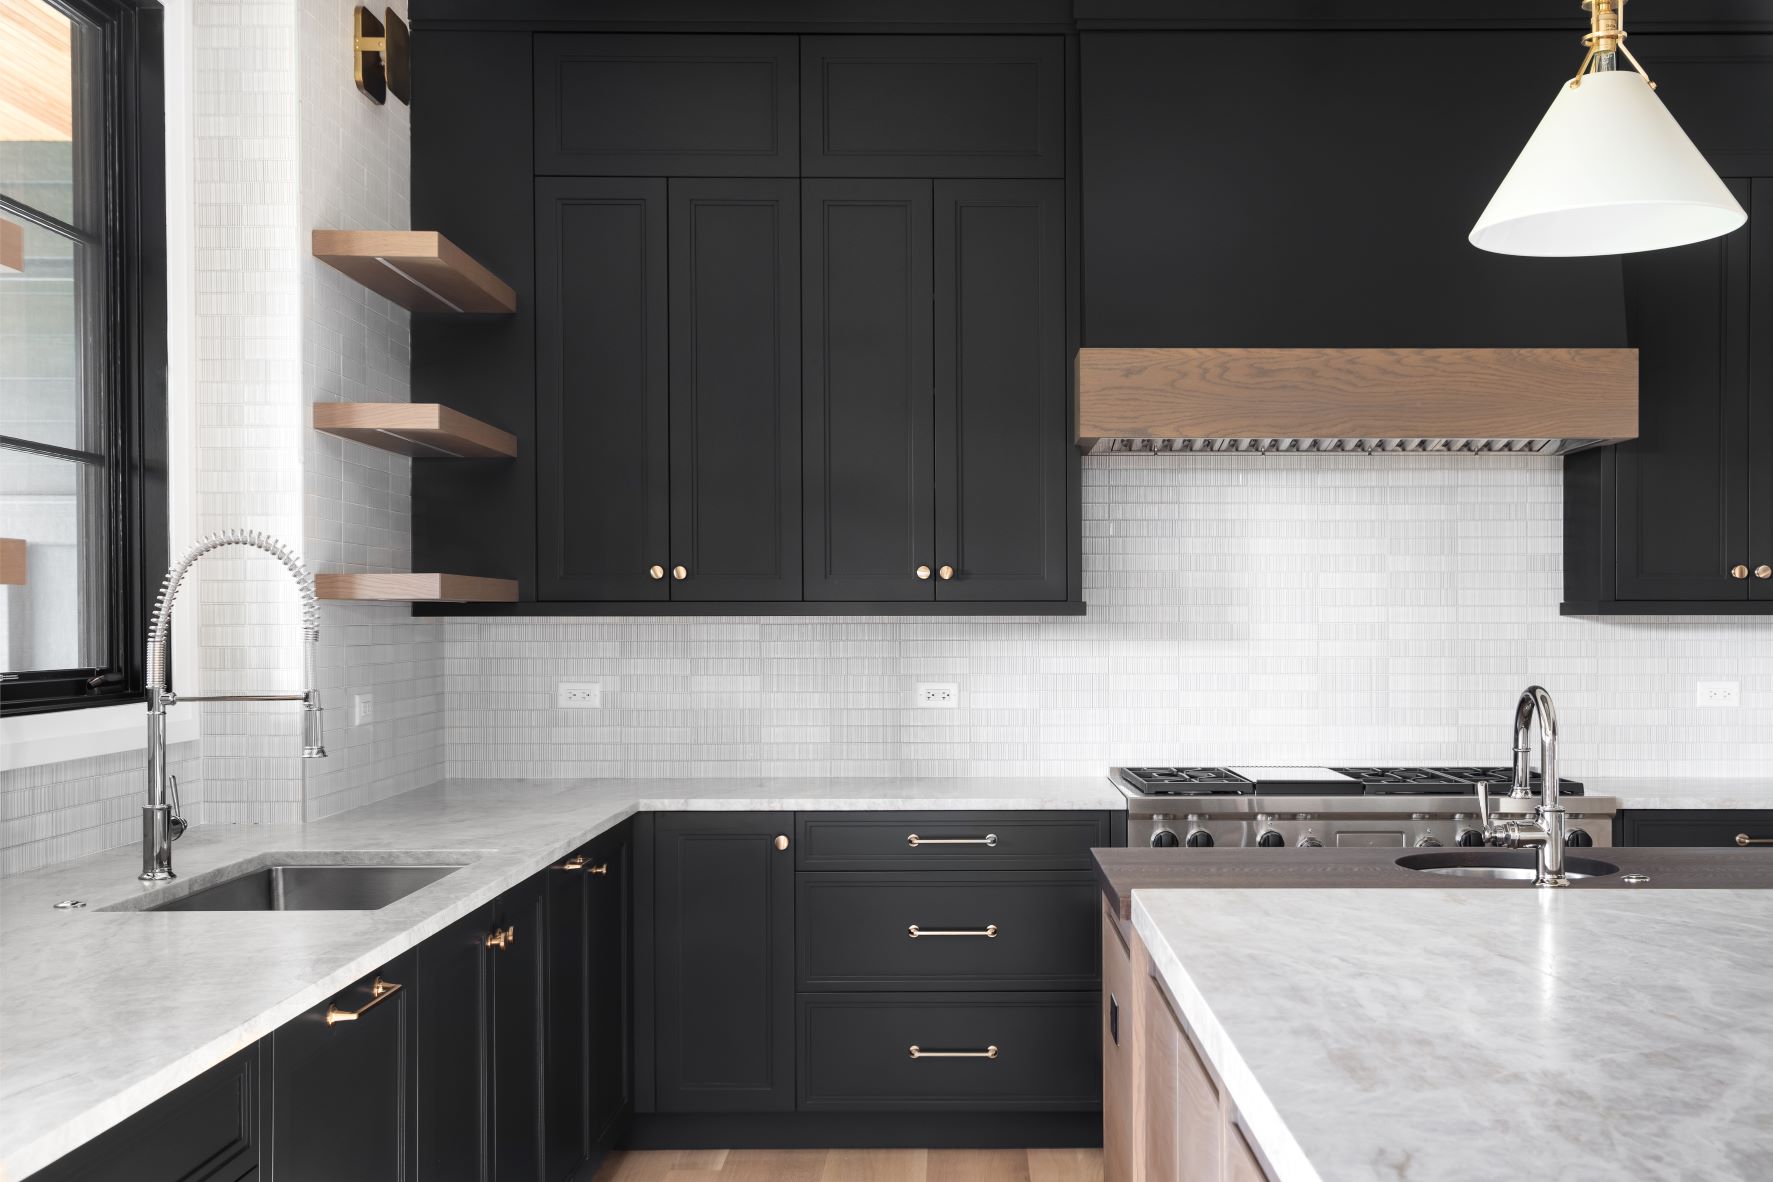 3 Cabinet Colors That Will Maintain For Years